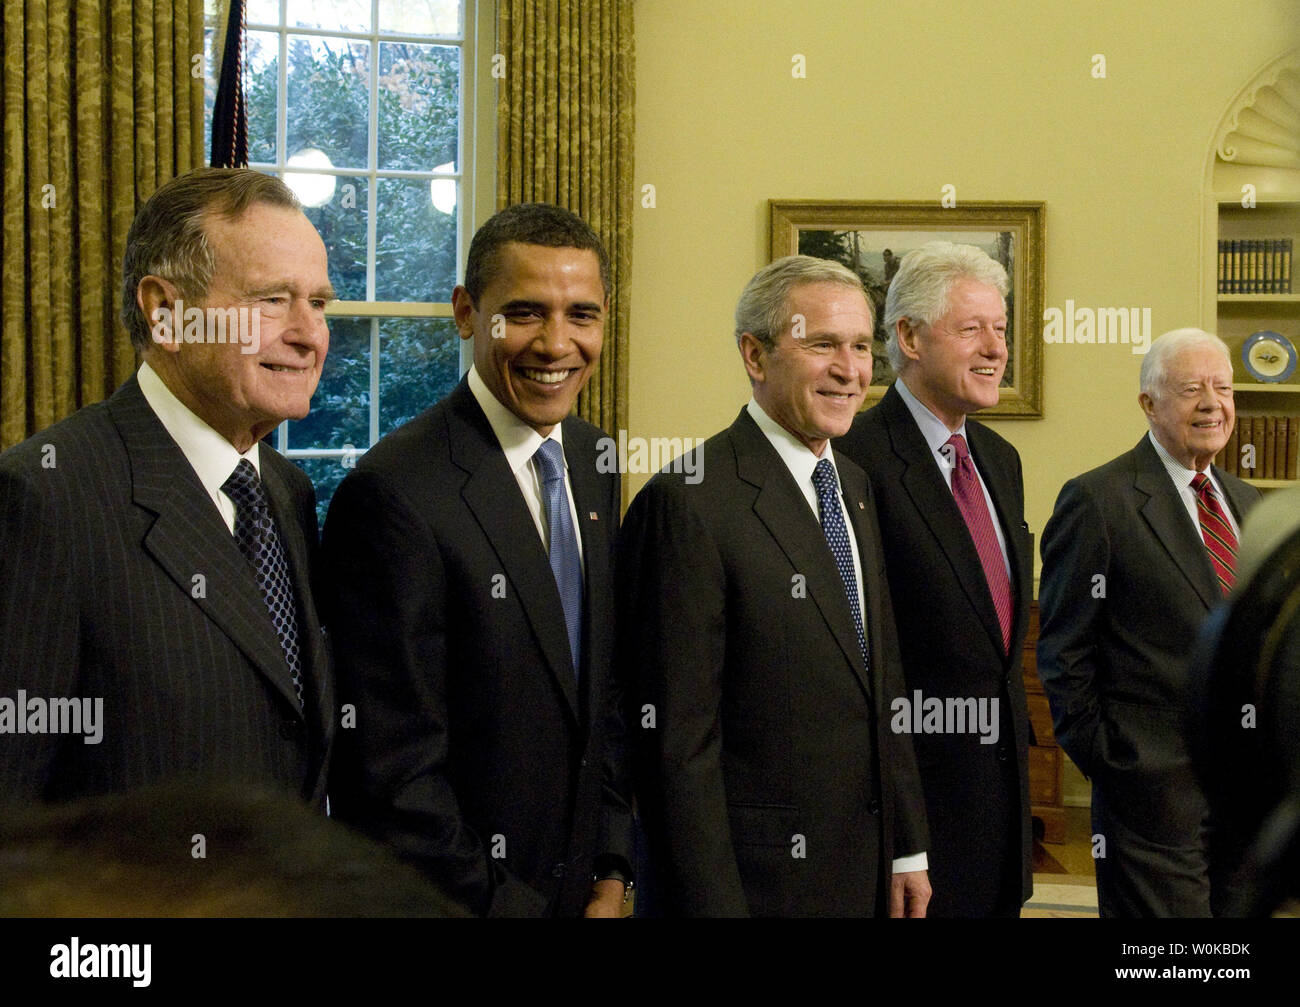 In this file photo, U.S. President George W. Bush (C) welcomes Former President George H.W. Bush (L), President-elect Barack Obama (LC), Former President Bill Clinton (RC) and Former President Jimmy Carter (R) to the Oval Office of the White House in Washington on January 7, 2009. This was the first time all of the living past, present and future Presidents were at the White House together since 1981. George Herbert Walker Bush died November 30, 2018 at the age of 94 years.       Photo by Ron Sachs/UPI Stock Photo